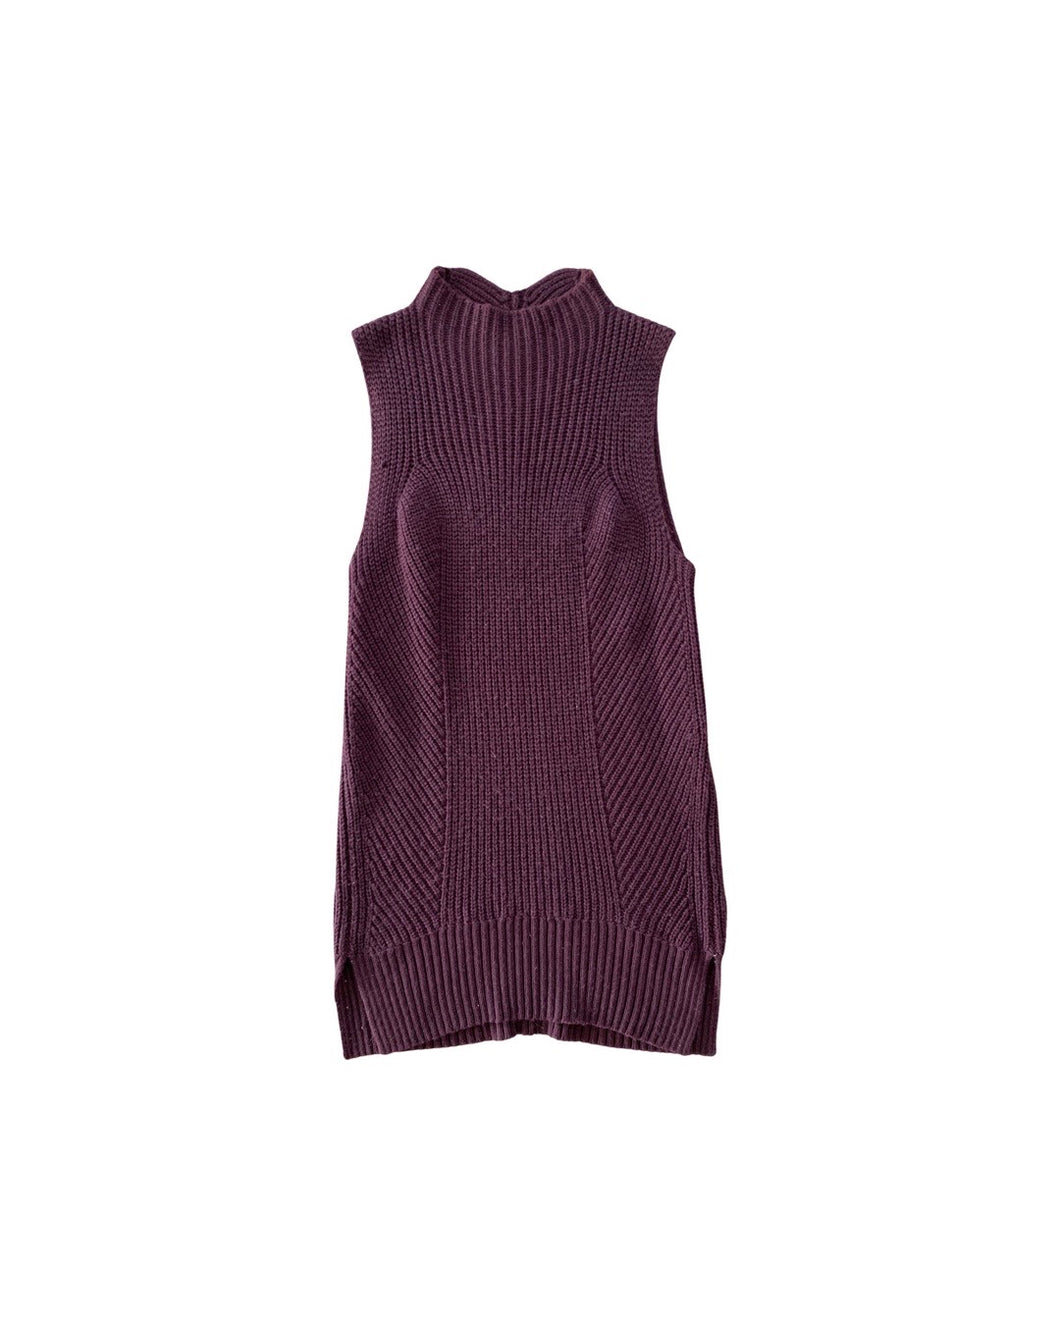 WITCHERY Size S Knit Dress in Mauve Womens SEP6521